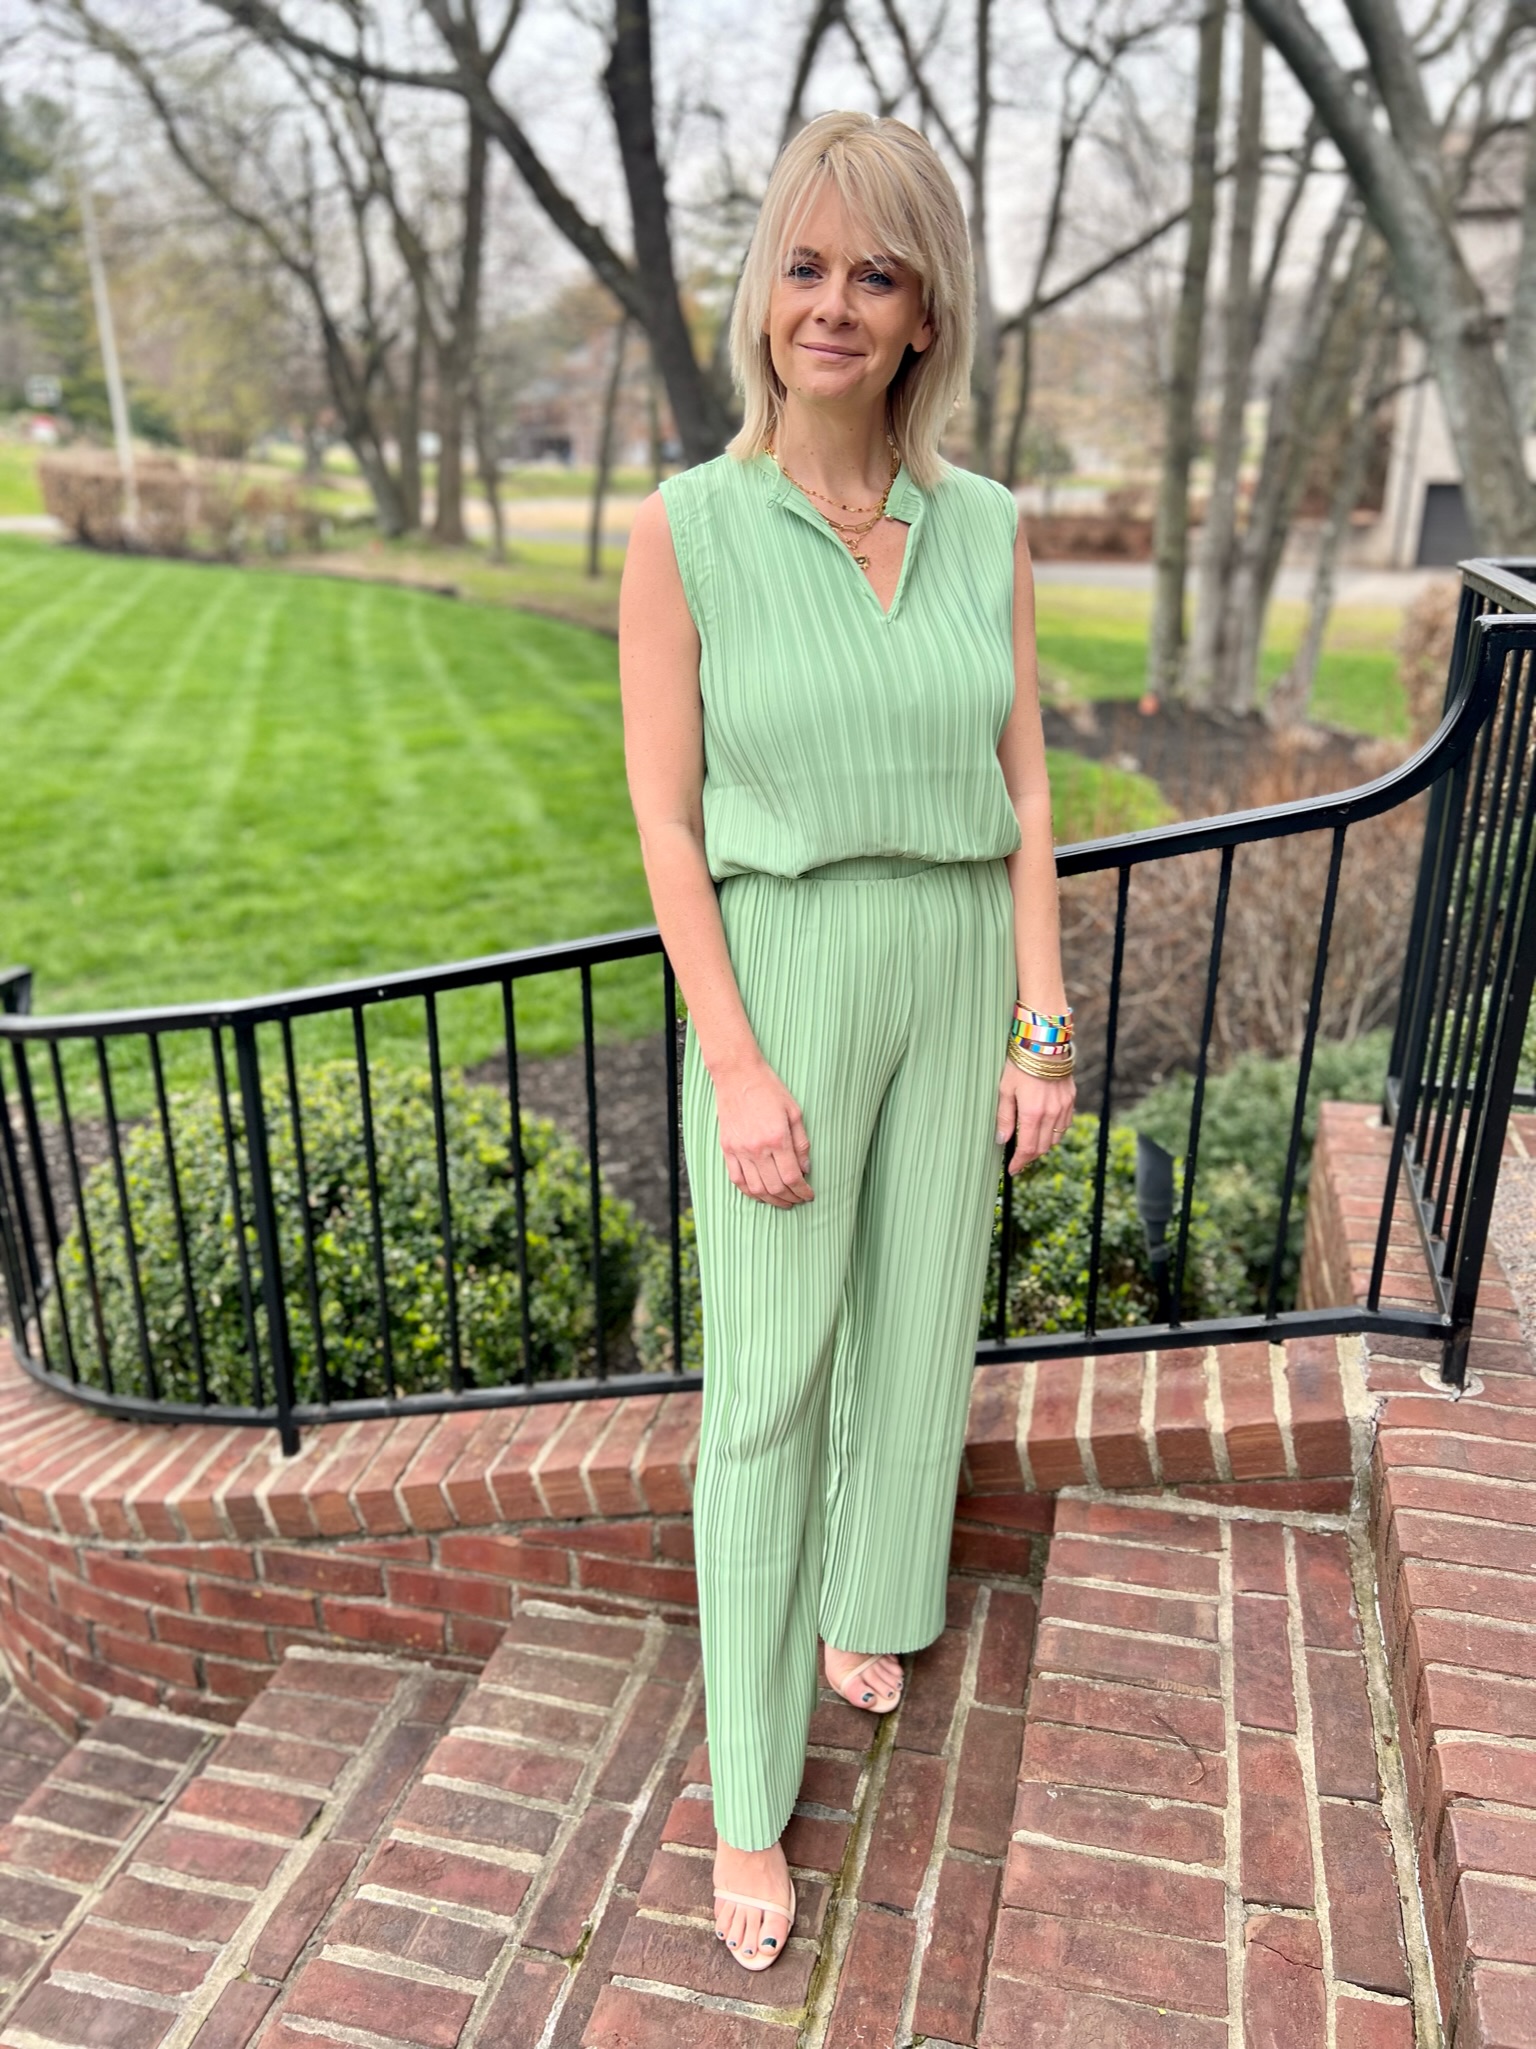 What To Wear For Spring Into Fashion Monochromatic Matching Pant Set how to style a monochromatic matching set how to wear a matching set for a spring event the best spring event looks what to wear to your spring events